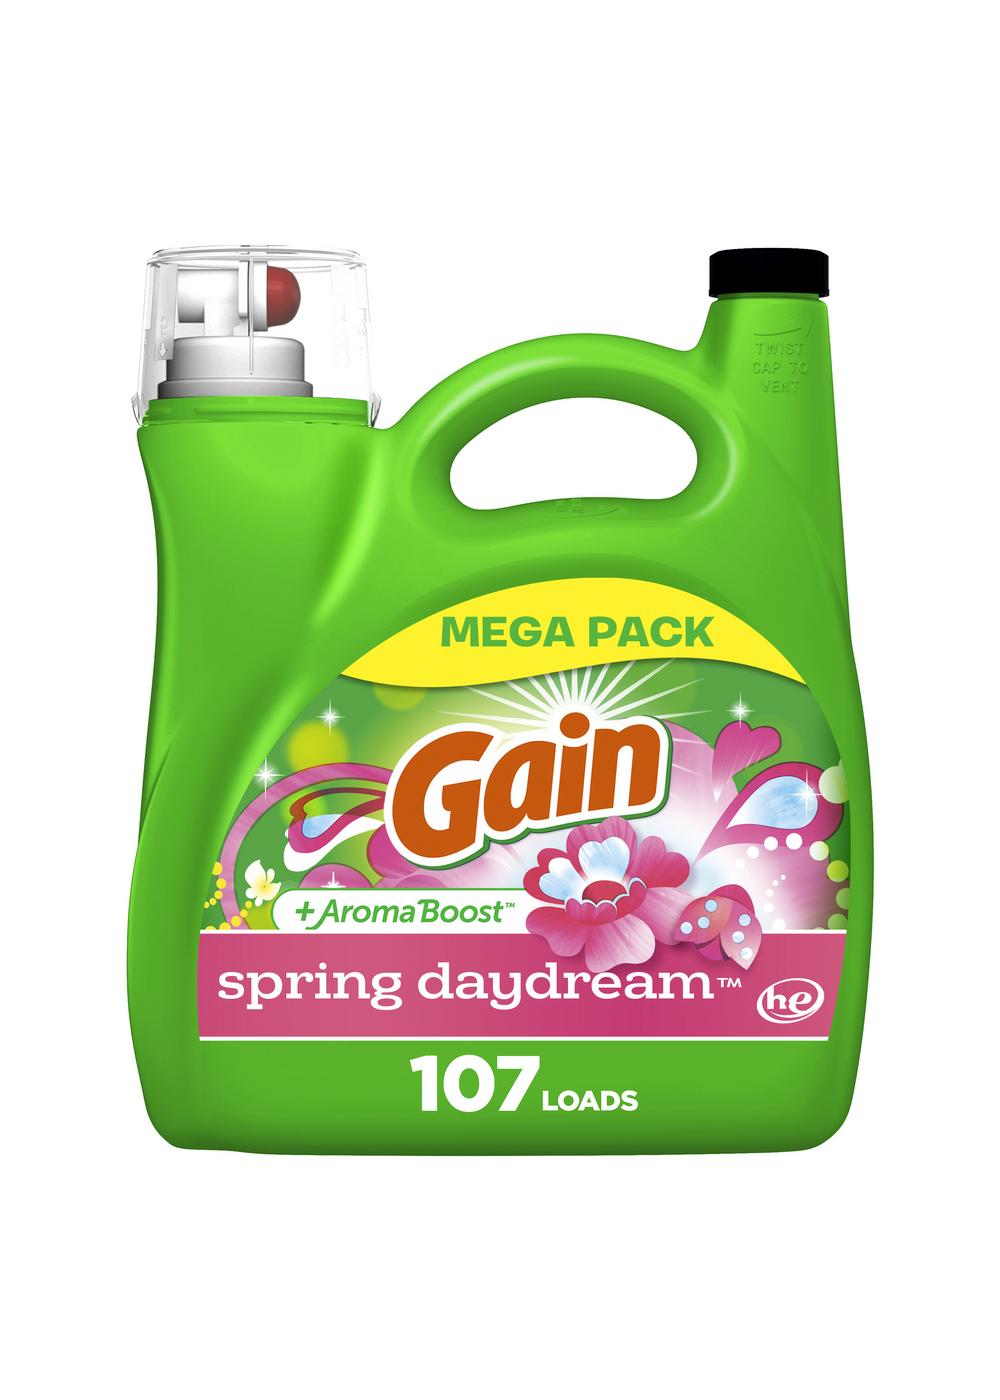 Gain + Aroma Boost HE Liquid Laundry Detergent, 107 Loads - Spring Daydream; image 1 of 6